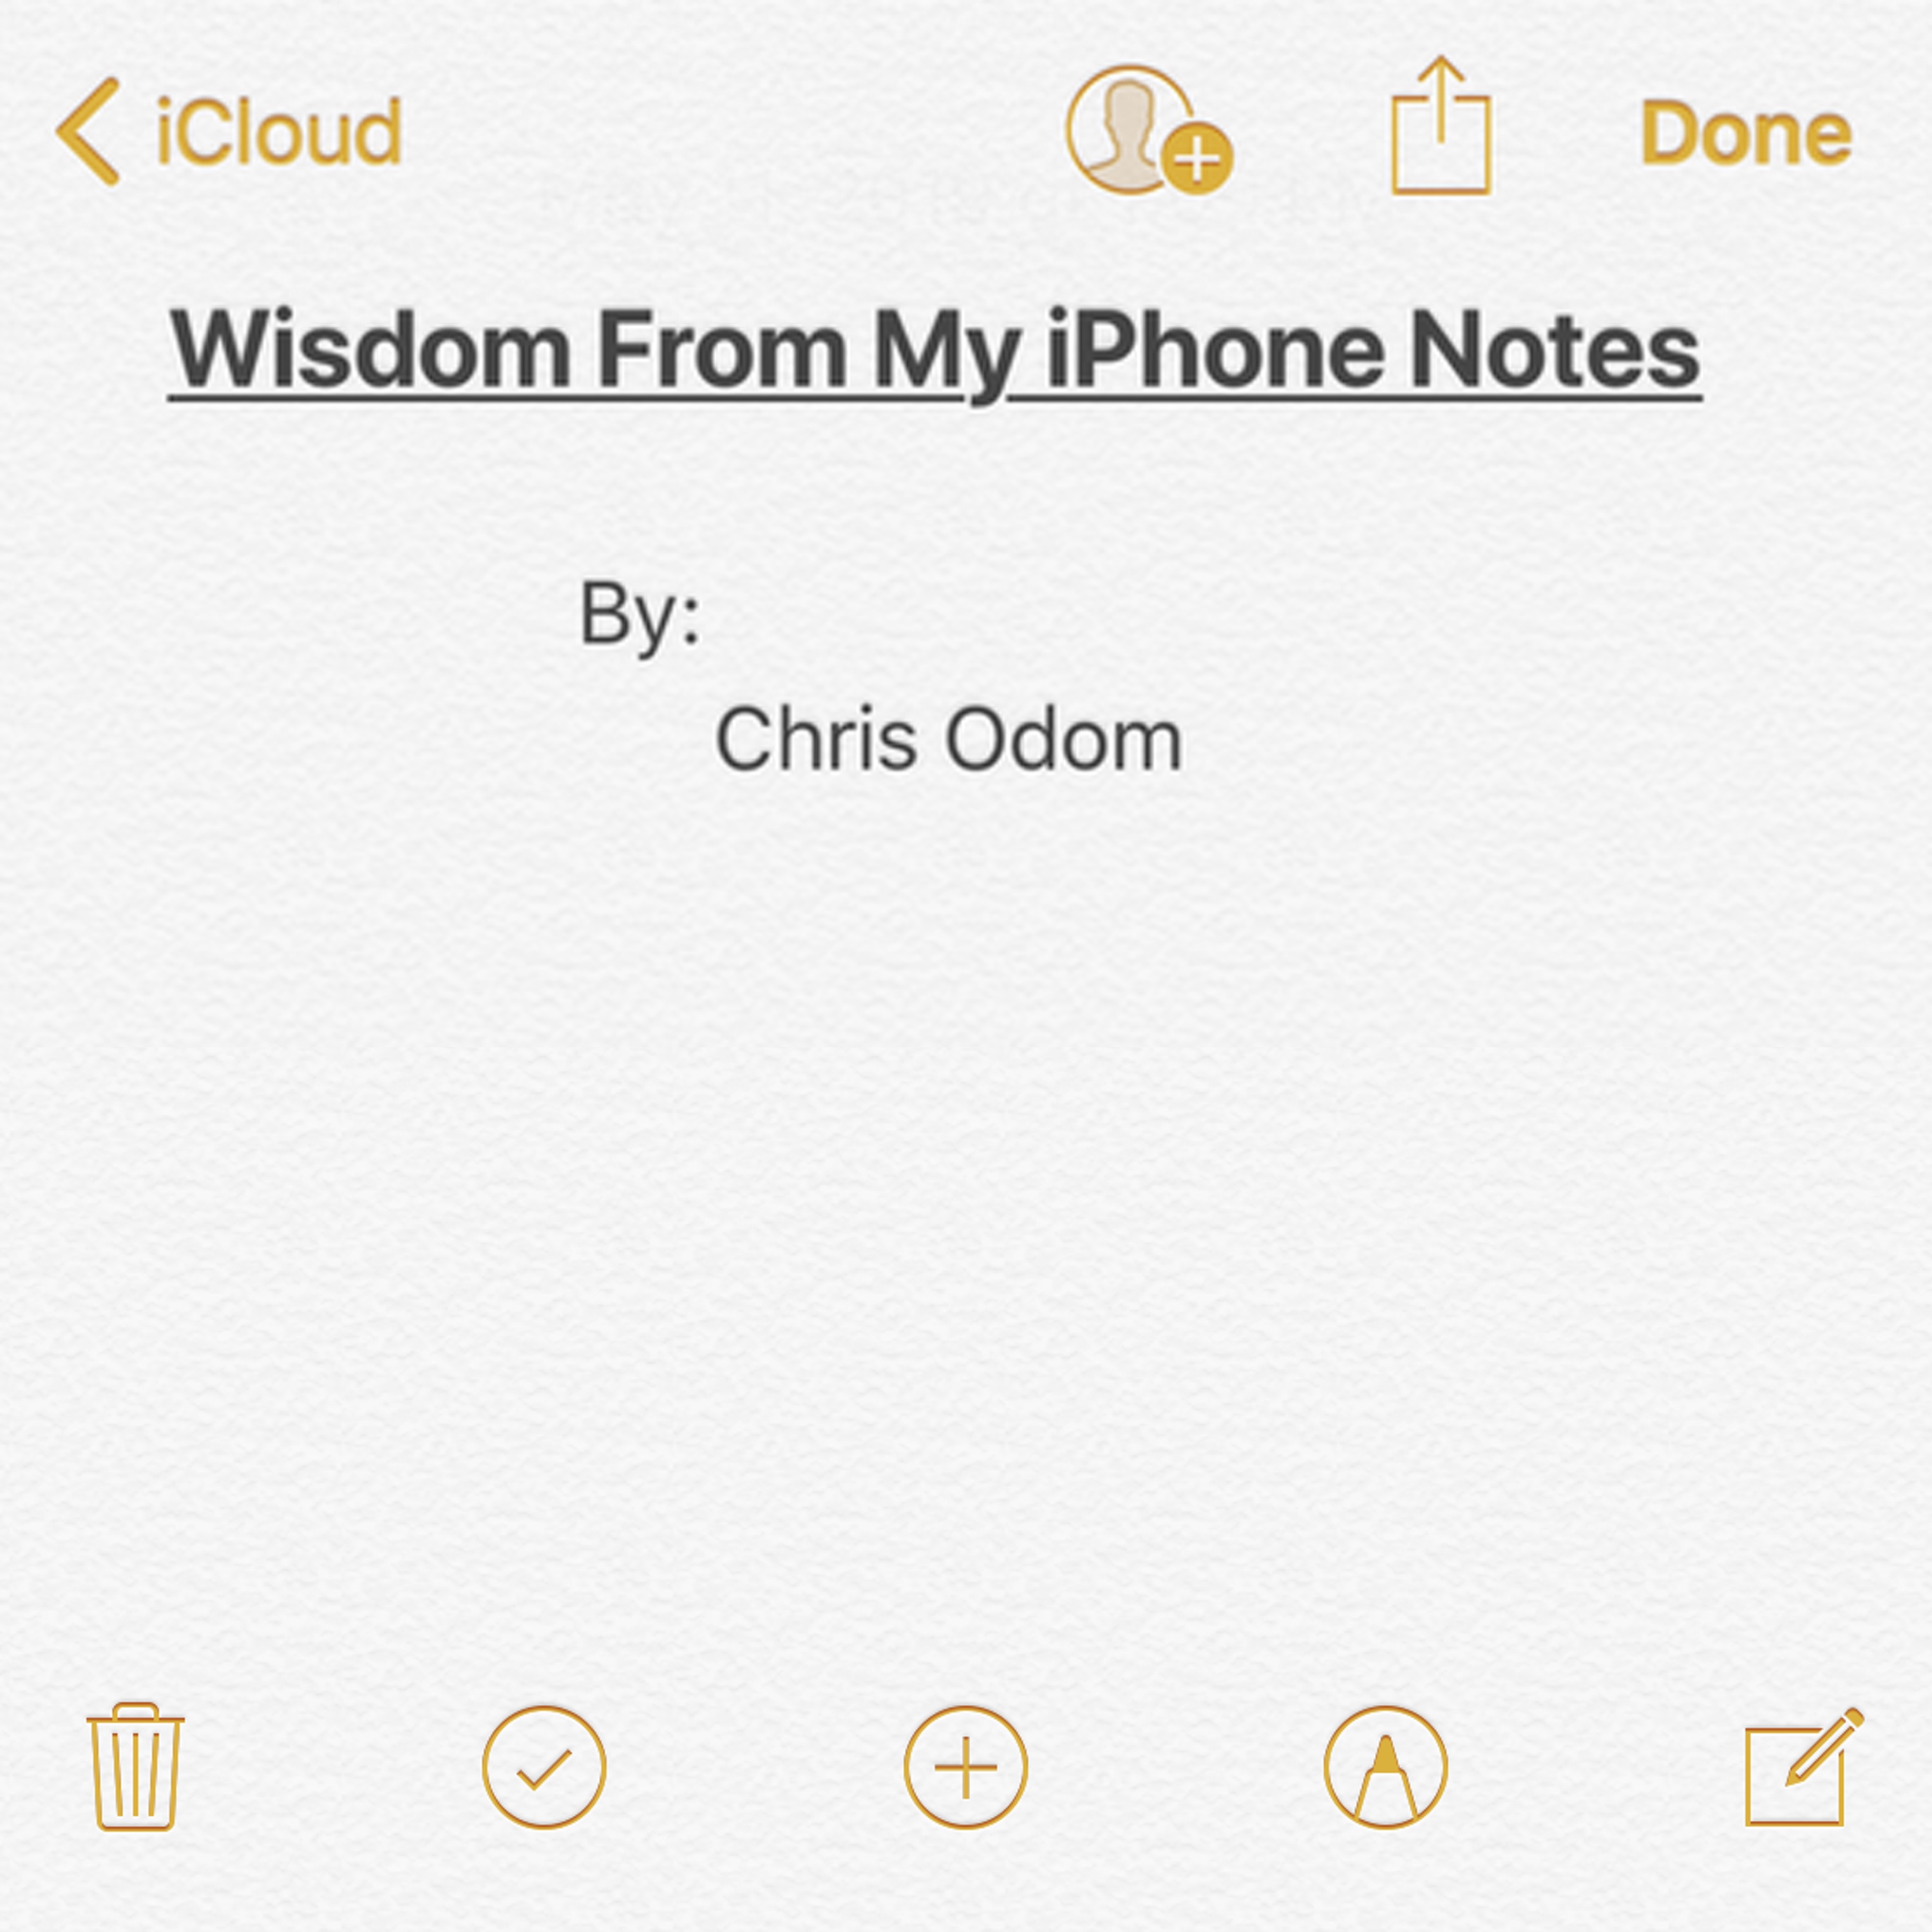 Wisdom From My iPhone Notes